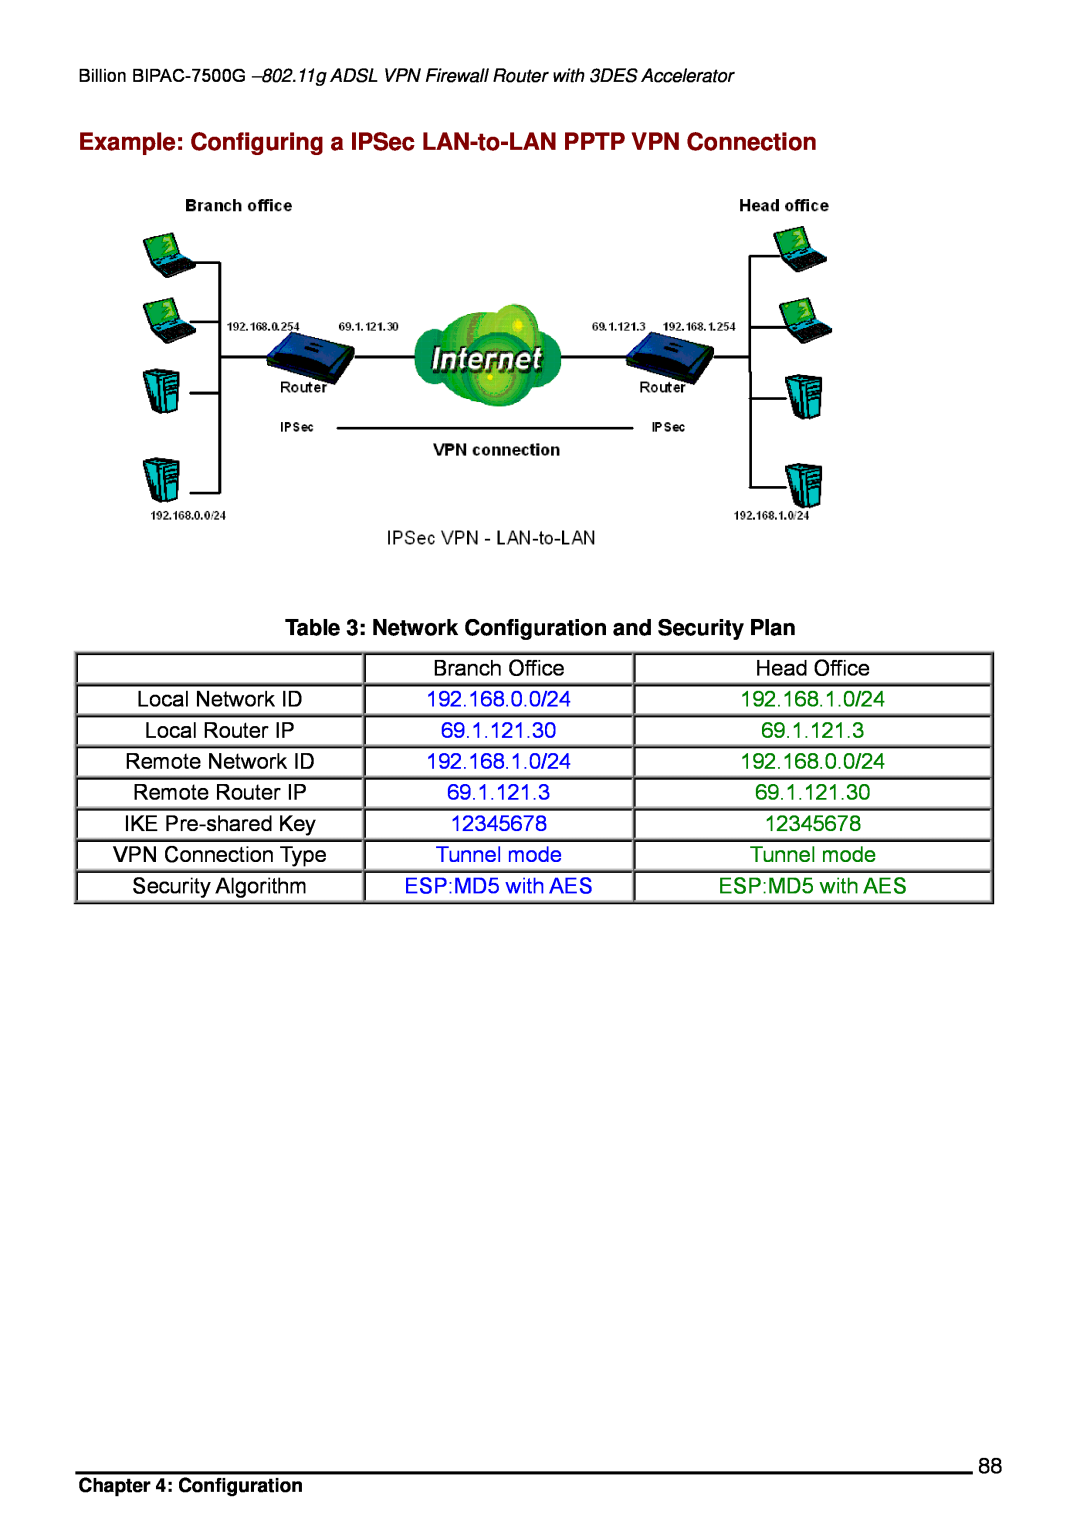 Billion Electric Company BIPAC-7500G user manual Example Configuring a IPSec LAN-to-LAN PPTP VPN Connection, Configuration 